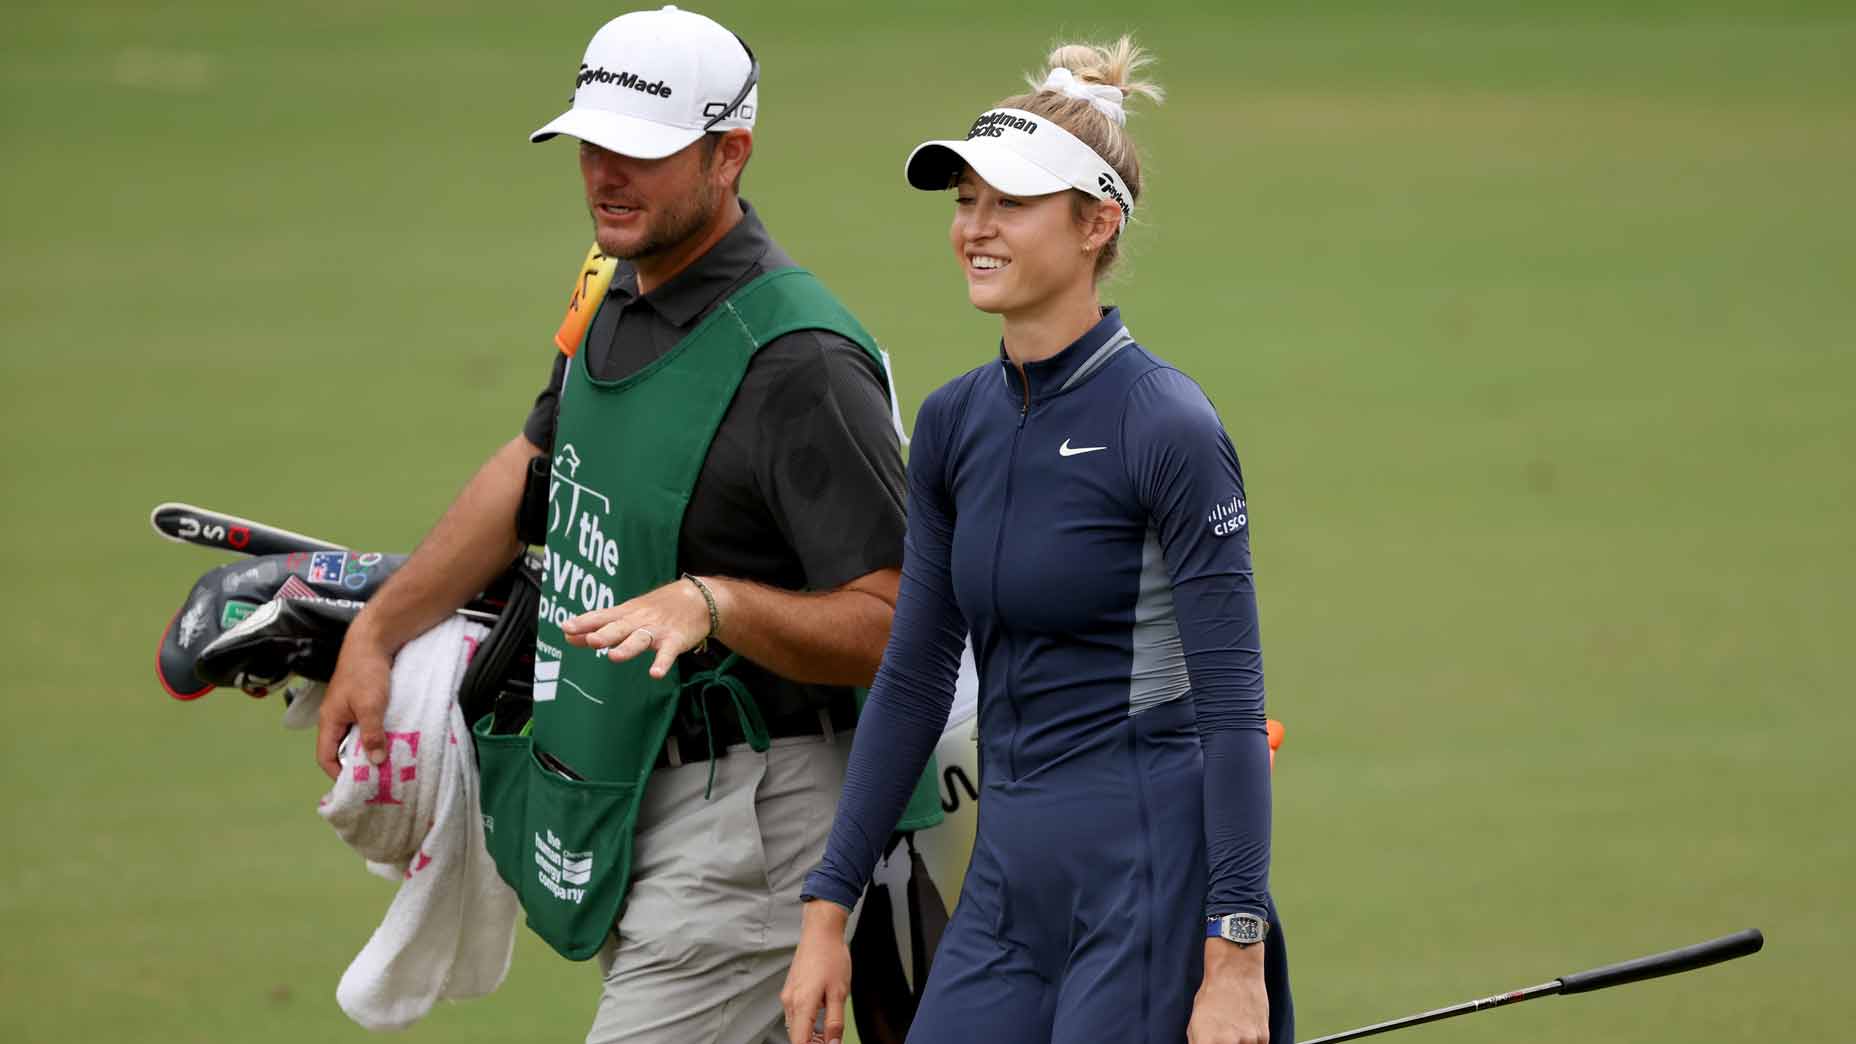 nelly korda smiles as she walks with her caddie during the third round of the chevron championship